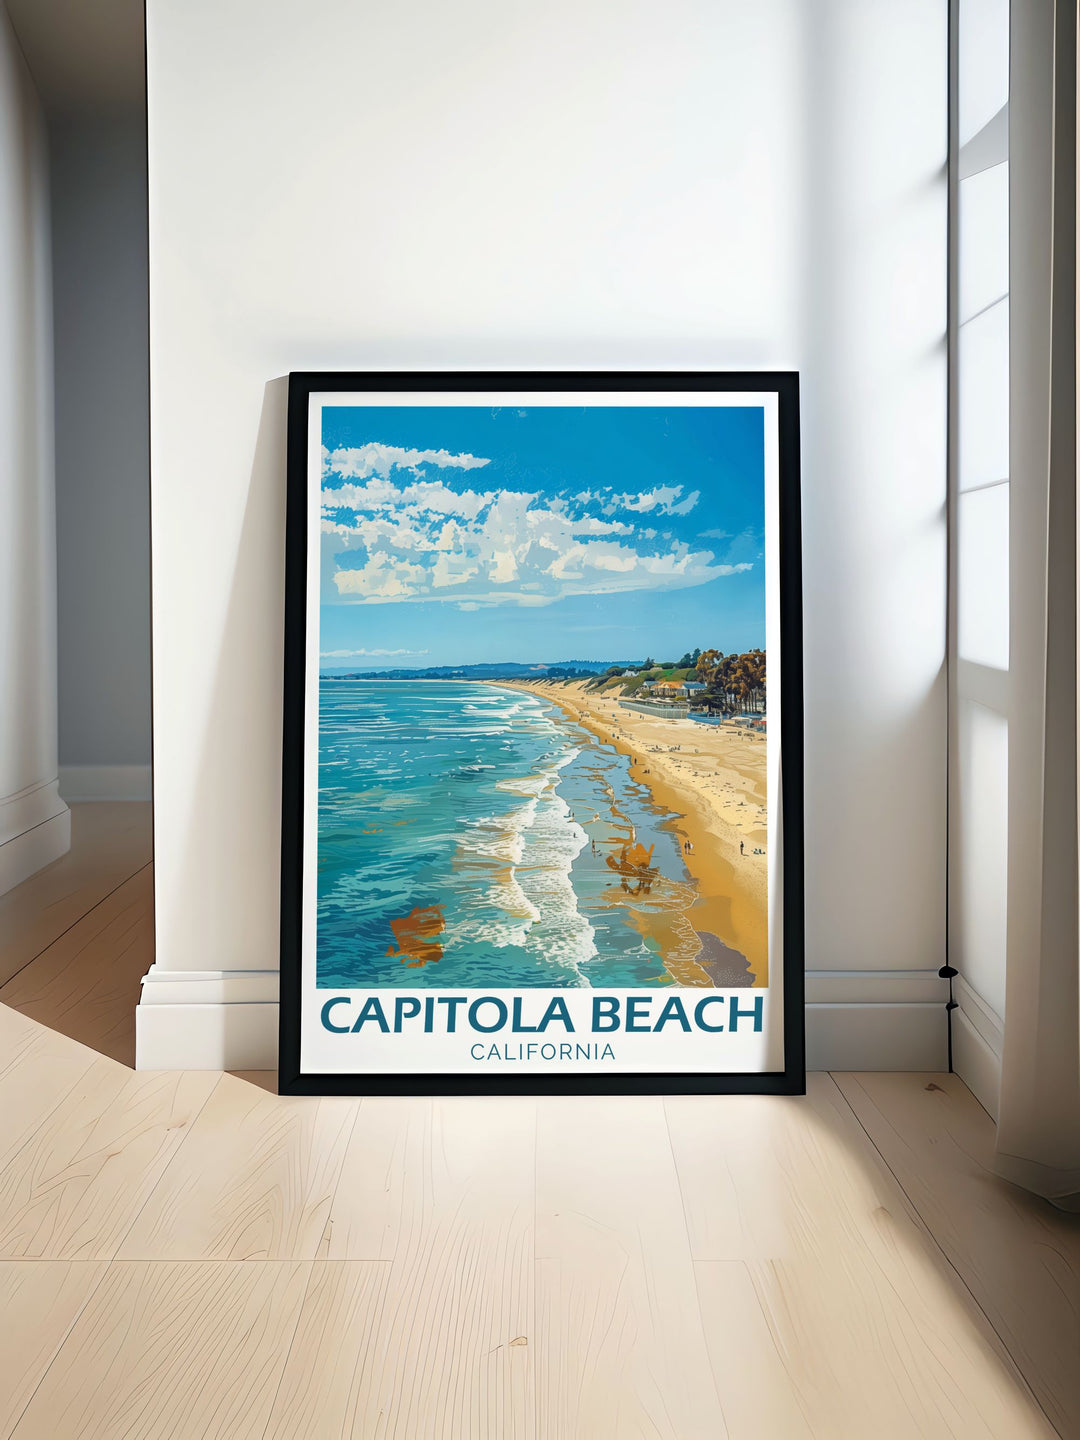 Capitola Beach Travel Poster showcasing vibrant colors and stunning details capturing the serene beauty of Californias coastline perfect for home decor and gifts enhancing any living space with the charm of Capitola Beach